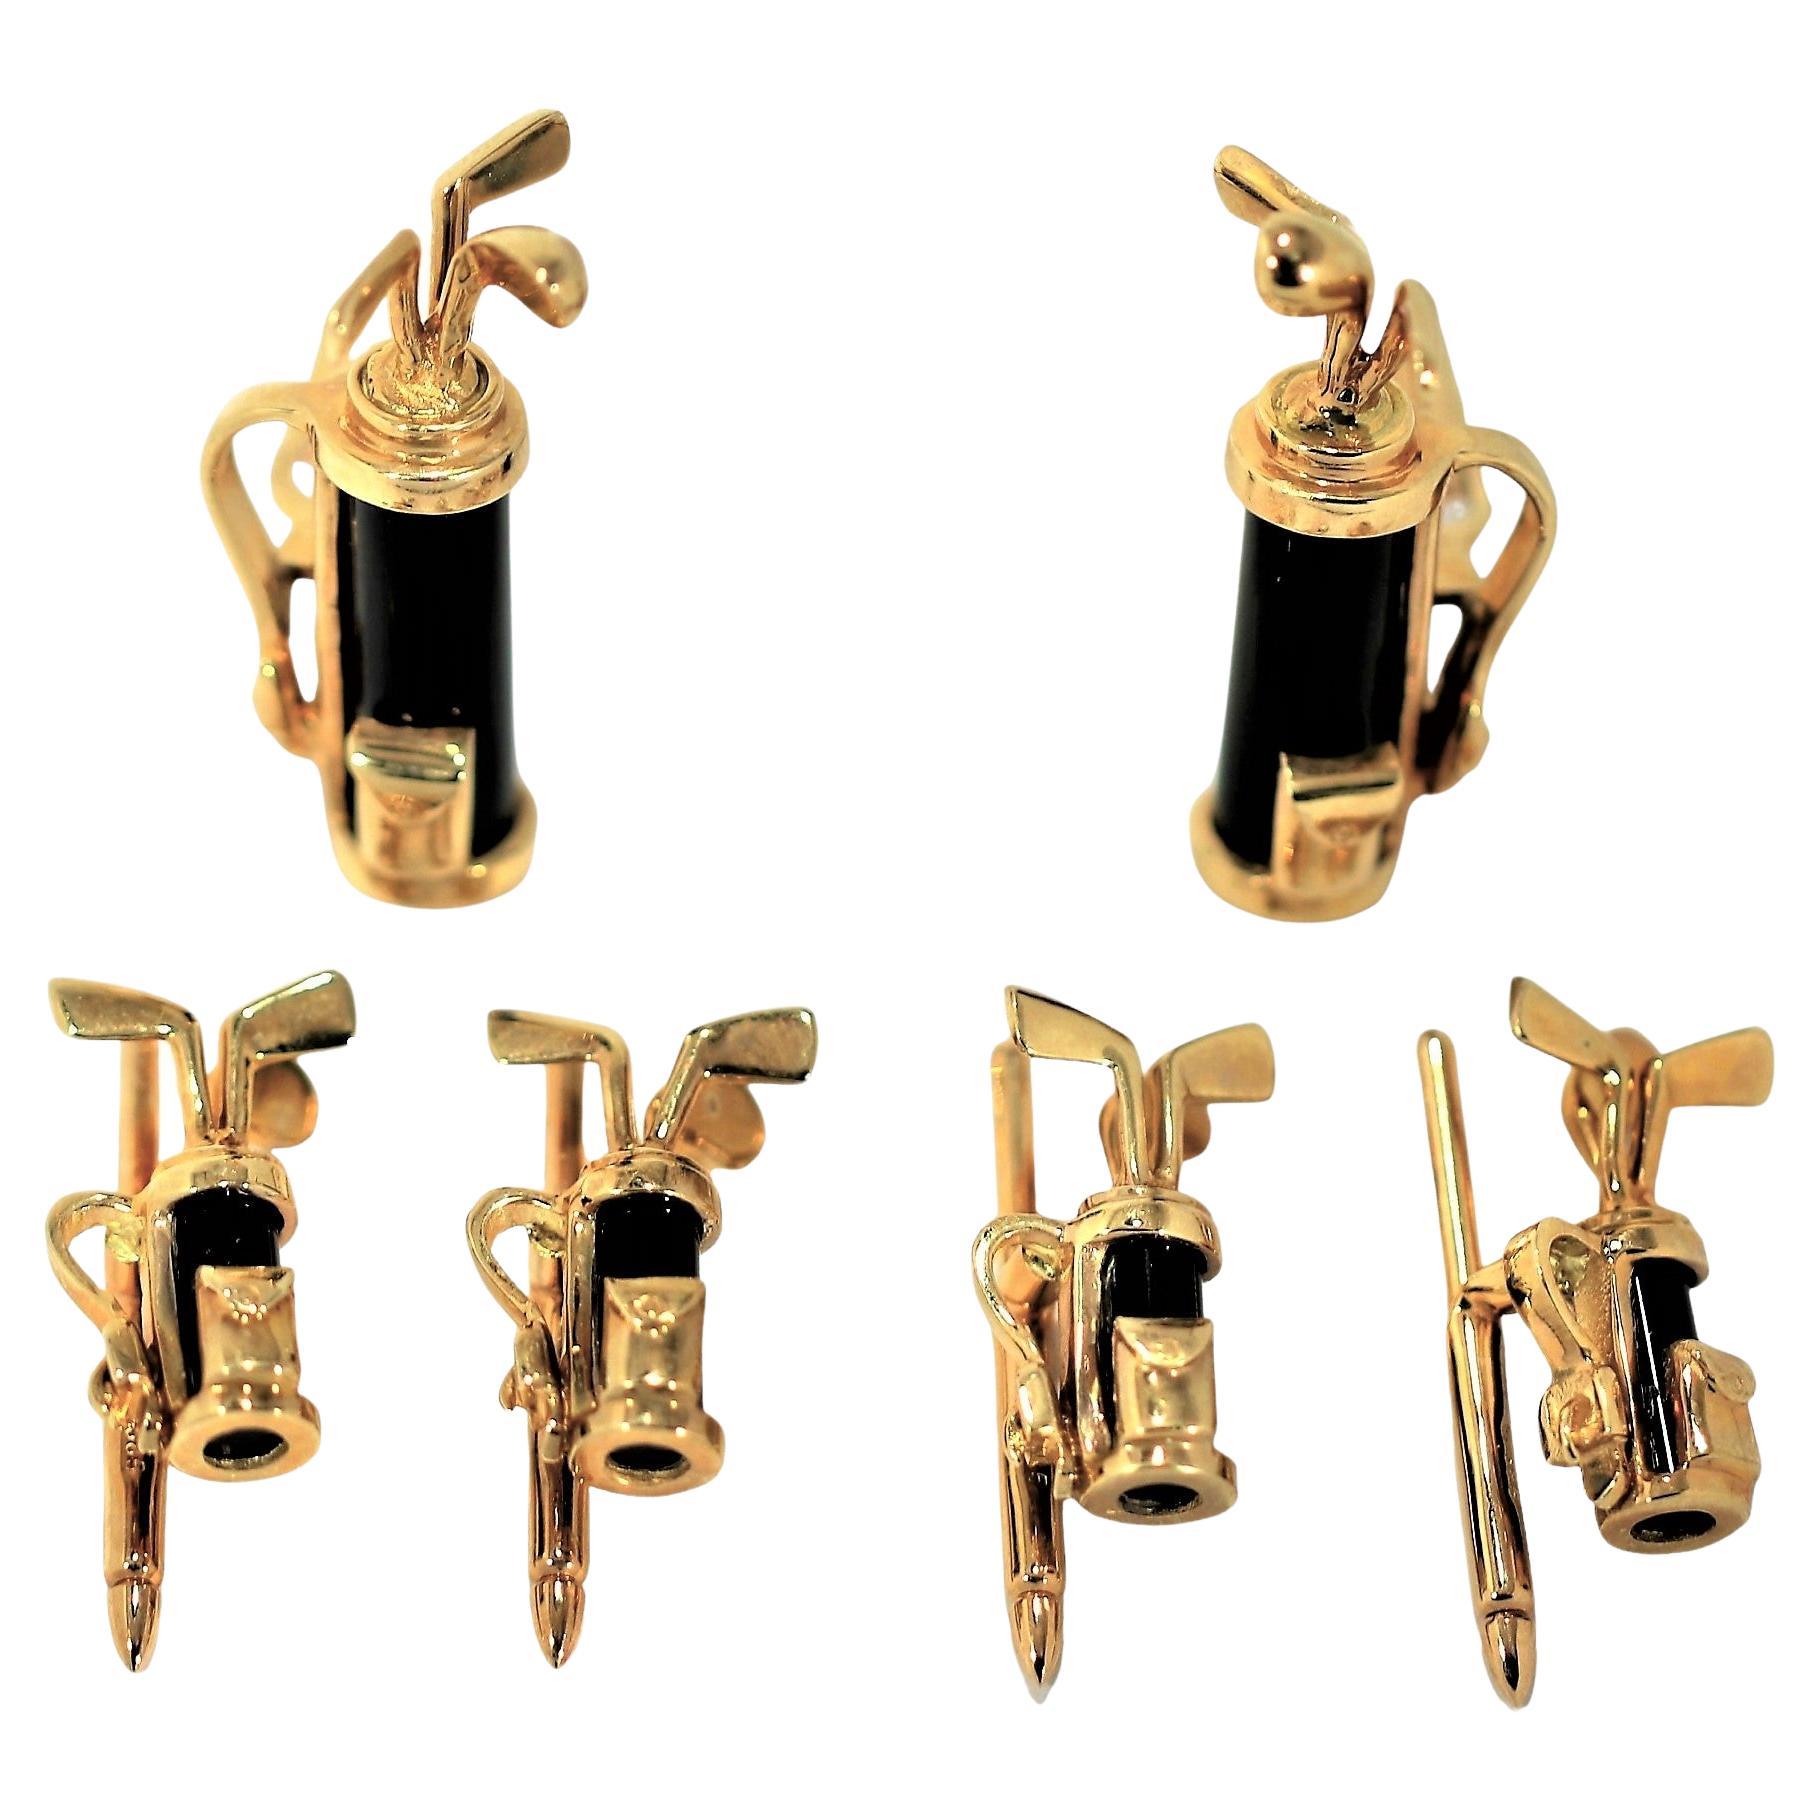 Finely Crafted 14k Yellow Gold and Onyx Golf Bag Formal Dress Set With 4 Buttons